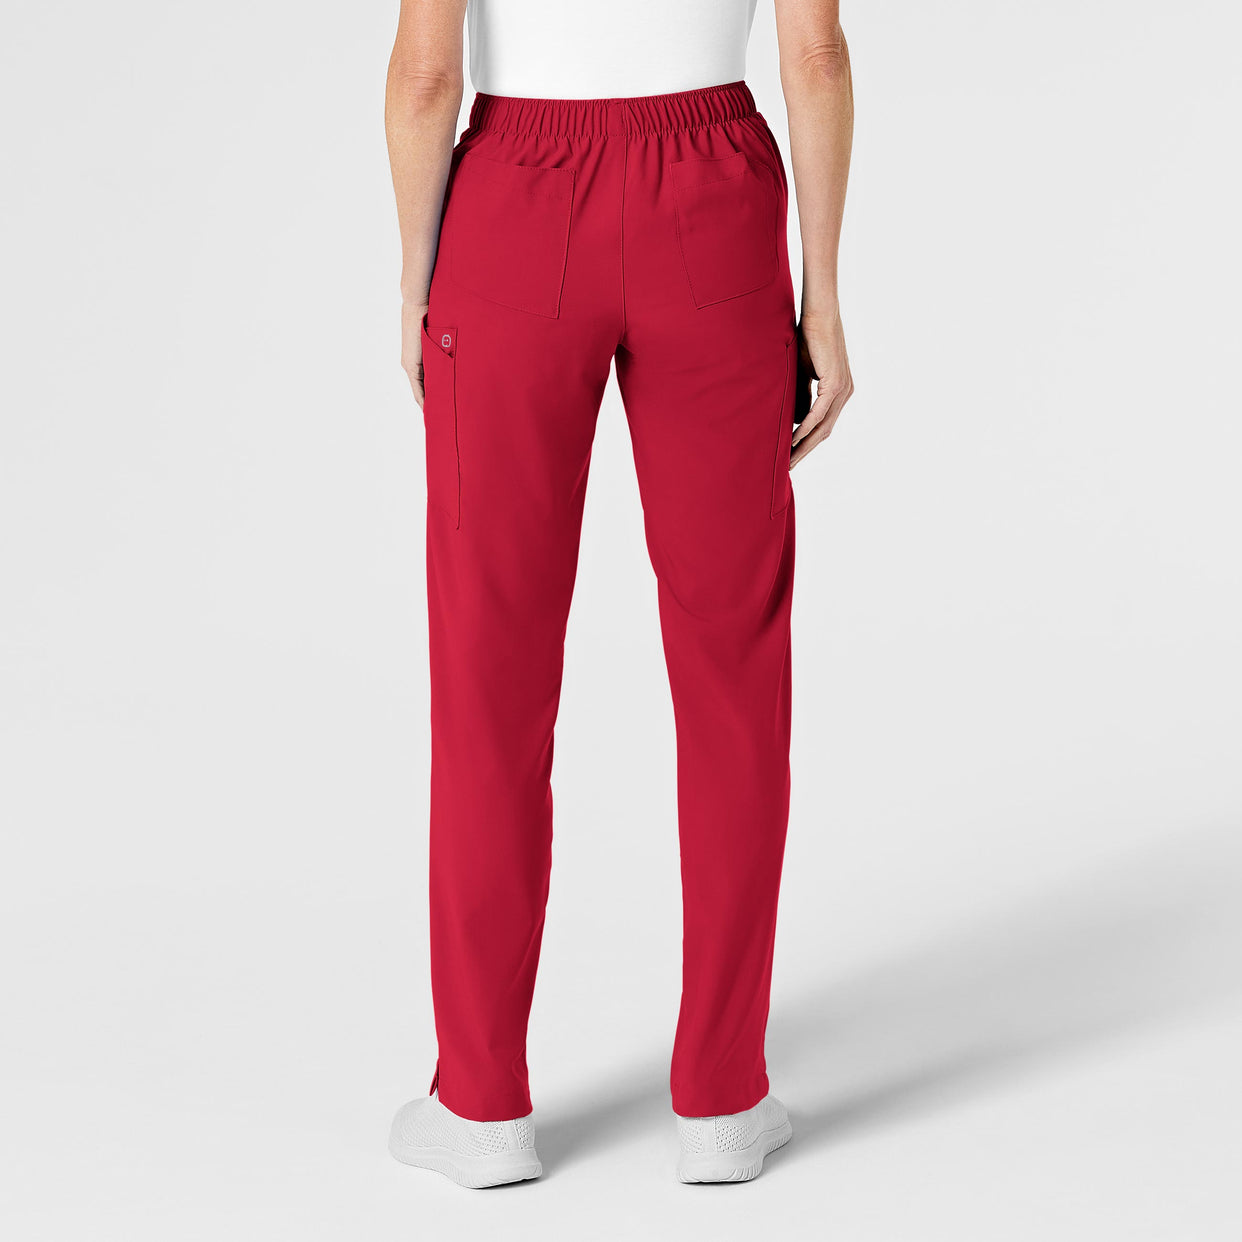 Women's Flat Front Cargo Scrub Pant Red Back